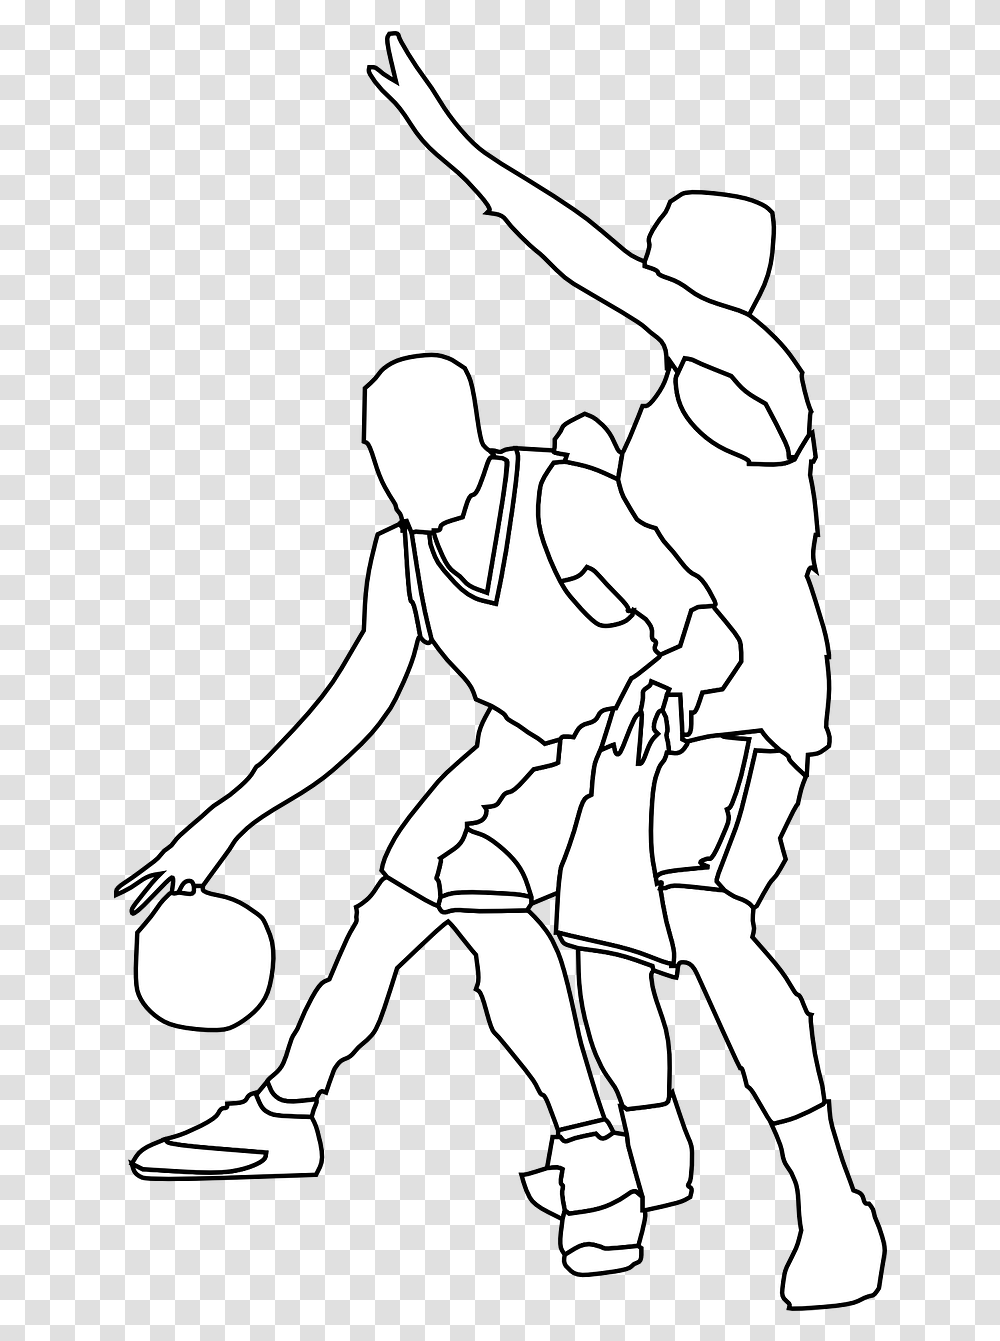 Basketball Players Defence Free Vector Graphic On Pixabay Basketball Game Drawing Player, Judo, Martial Arts, Sport, Person Transparent Png